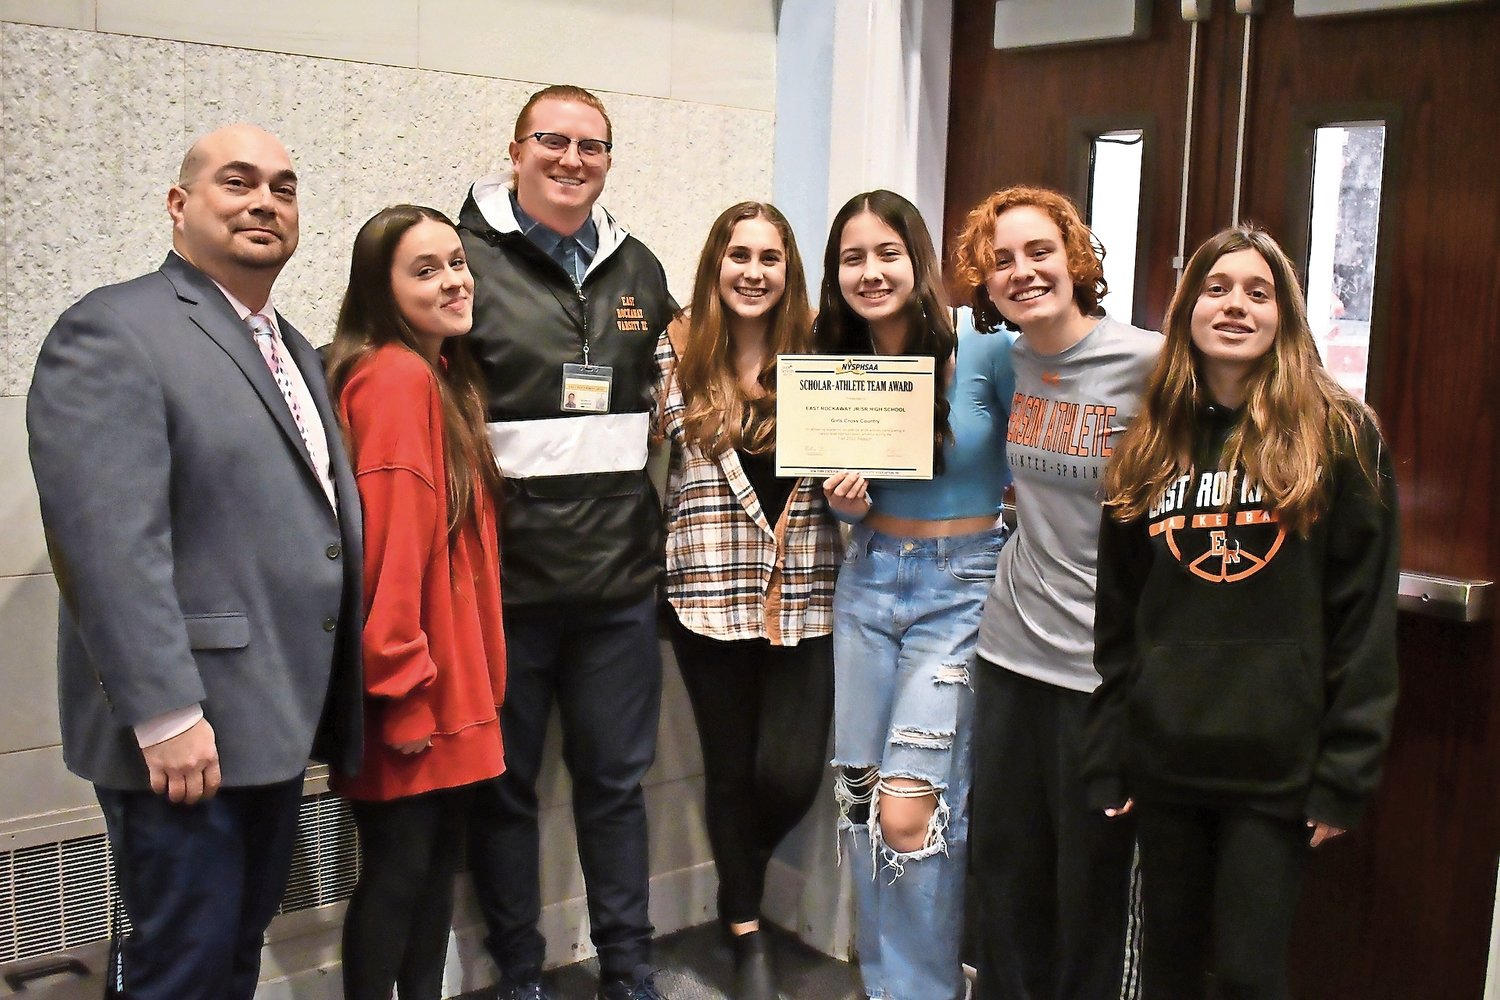 Members of East Rockaway Jr./Sr. High School girls’ cross country team were honored as a Scholar-Athlete team with Athletic Director Gary Gregory and Coach Kenneth Anderson.